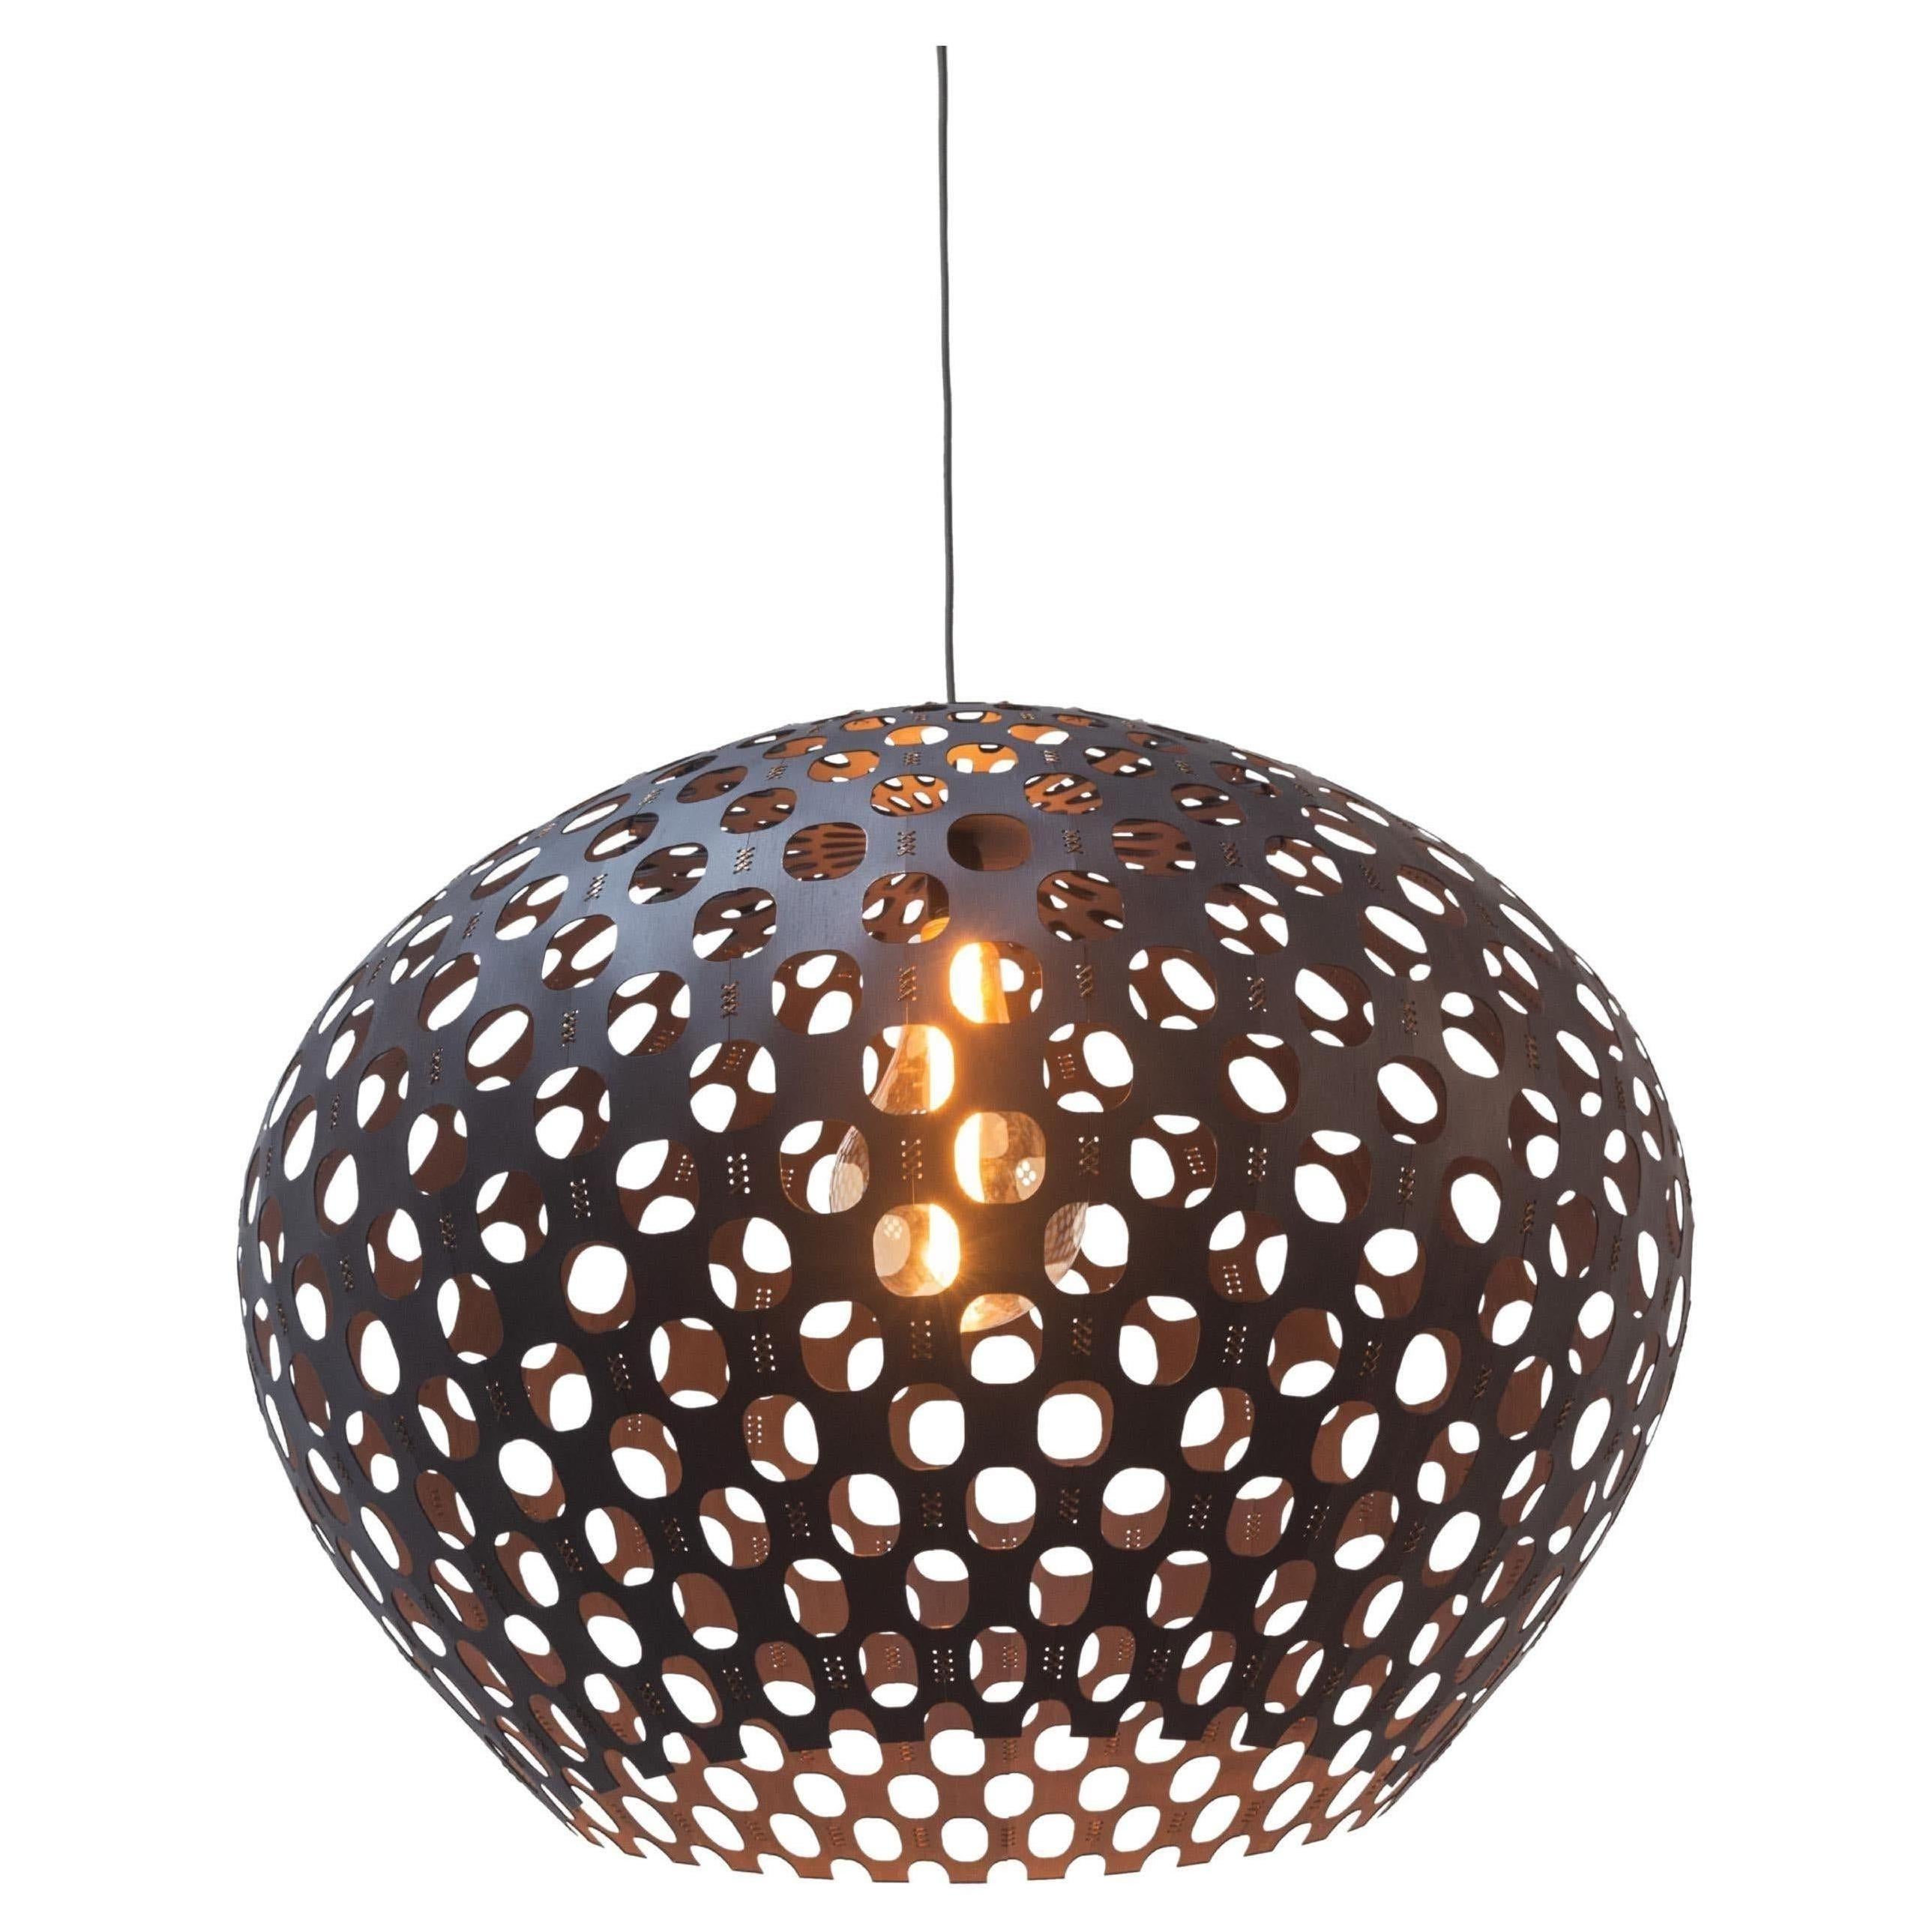 Panelitos Sphere Lamp Medium by Piegatto, a Contemporary Sculptural Lamp For Sale